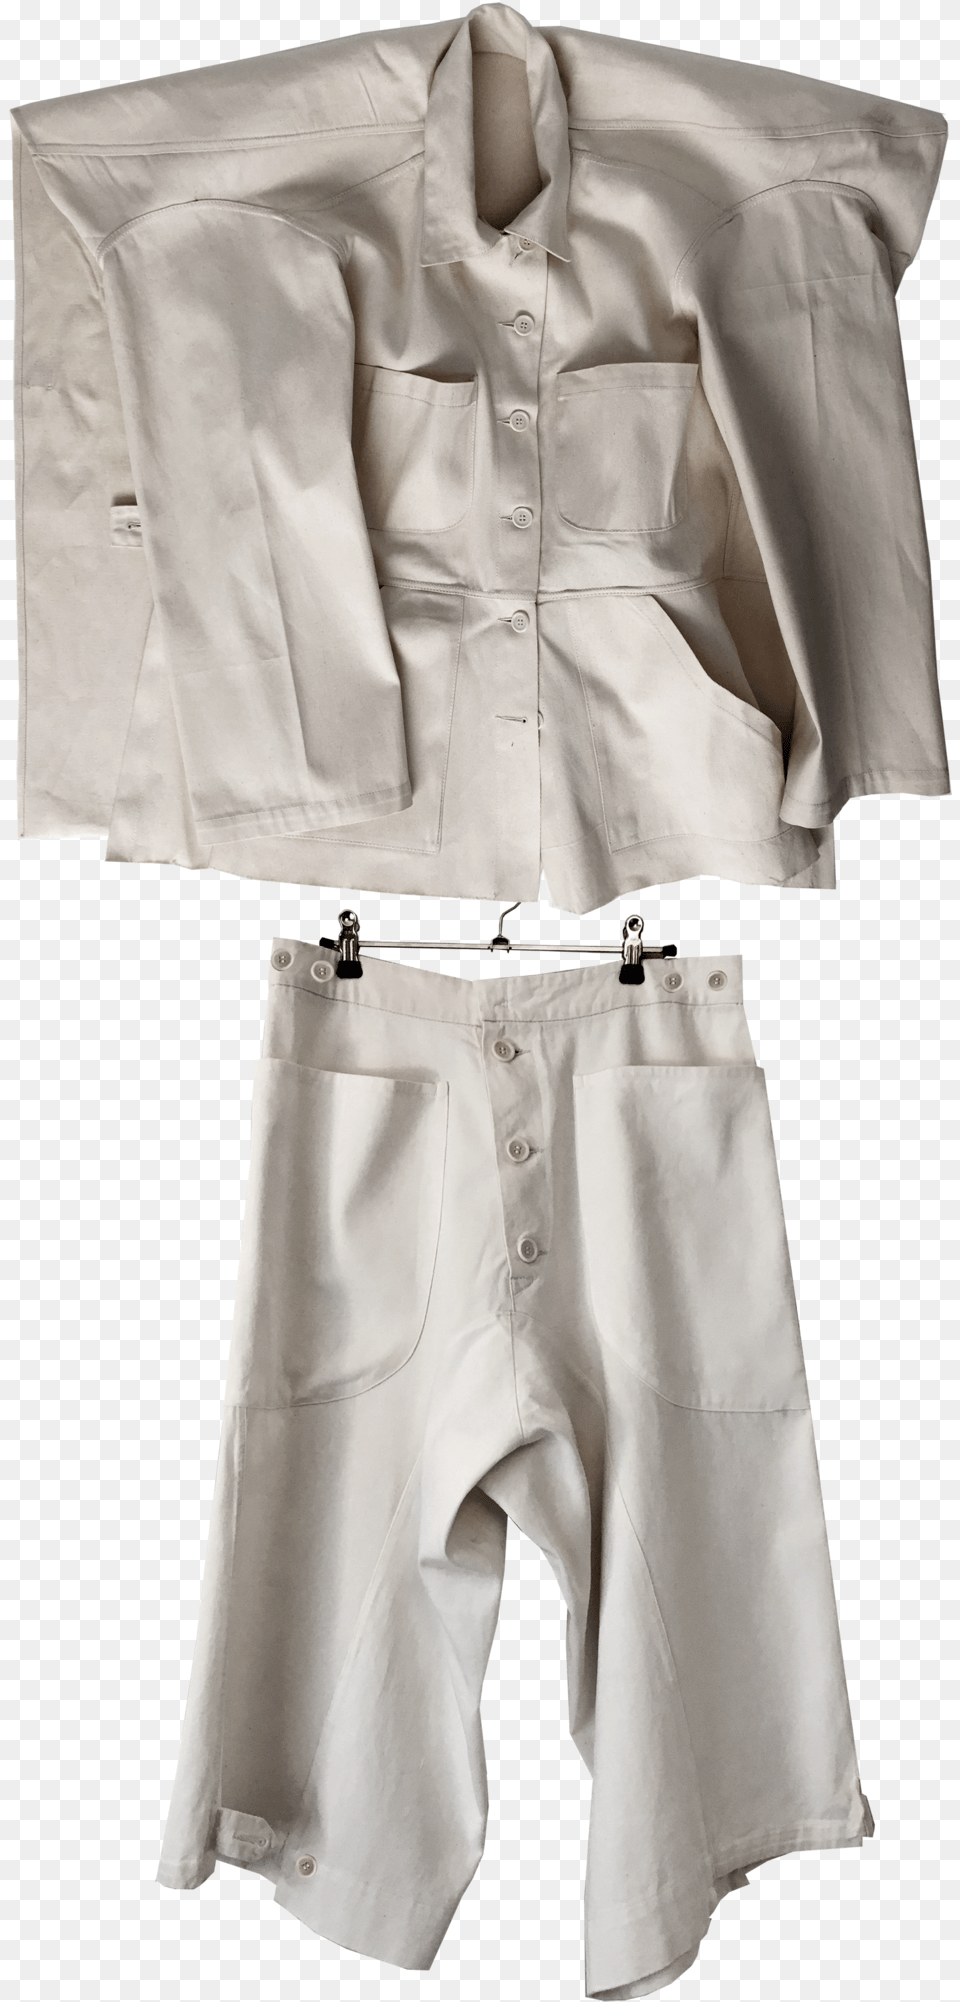 Utility Flat Jacket Ampamp One Piece Garment, Clothing, Shorts, Skirt, Home Decor Free Transparent Png